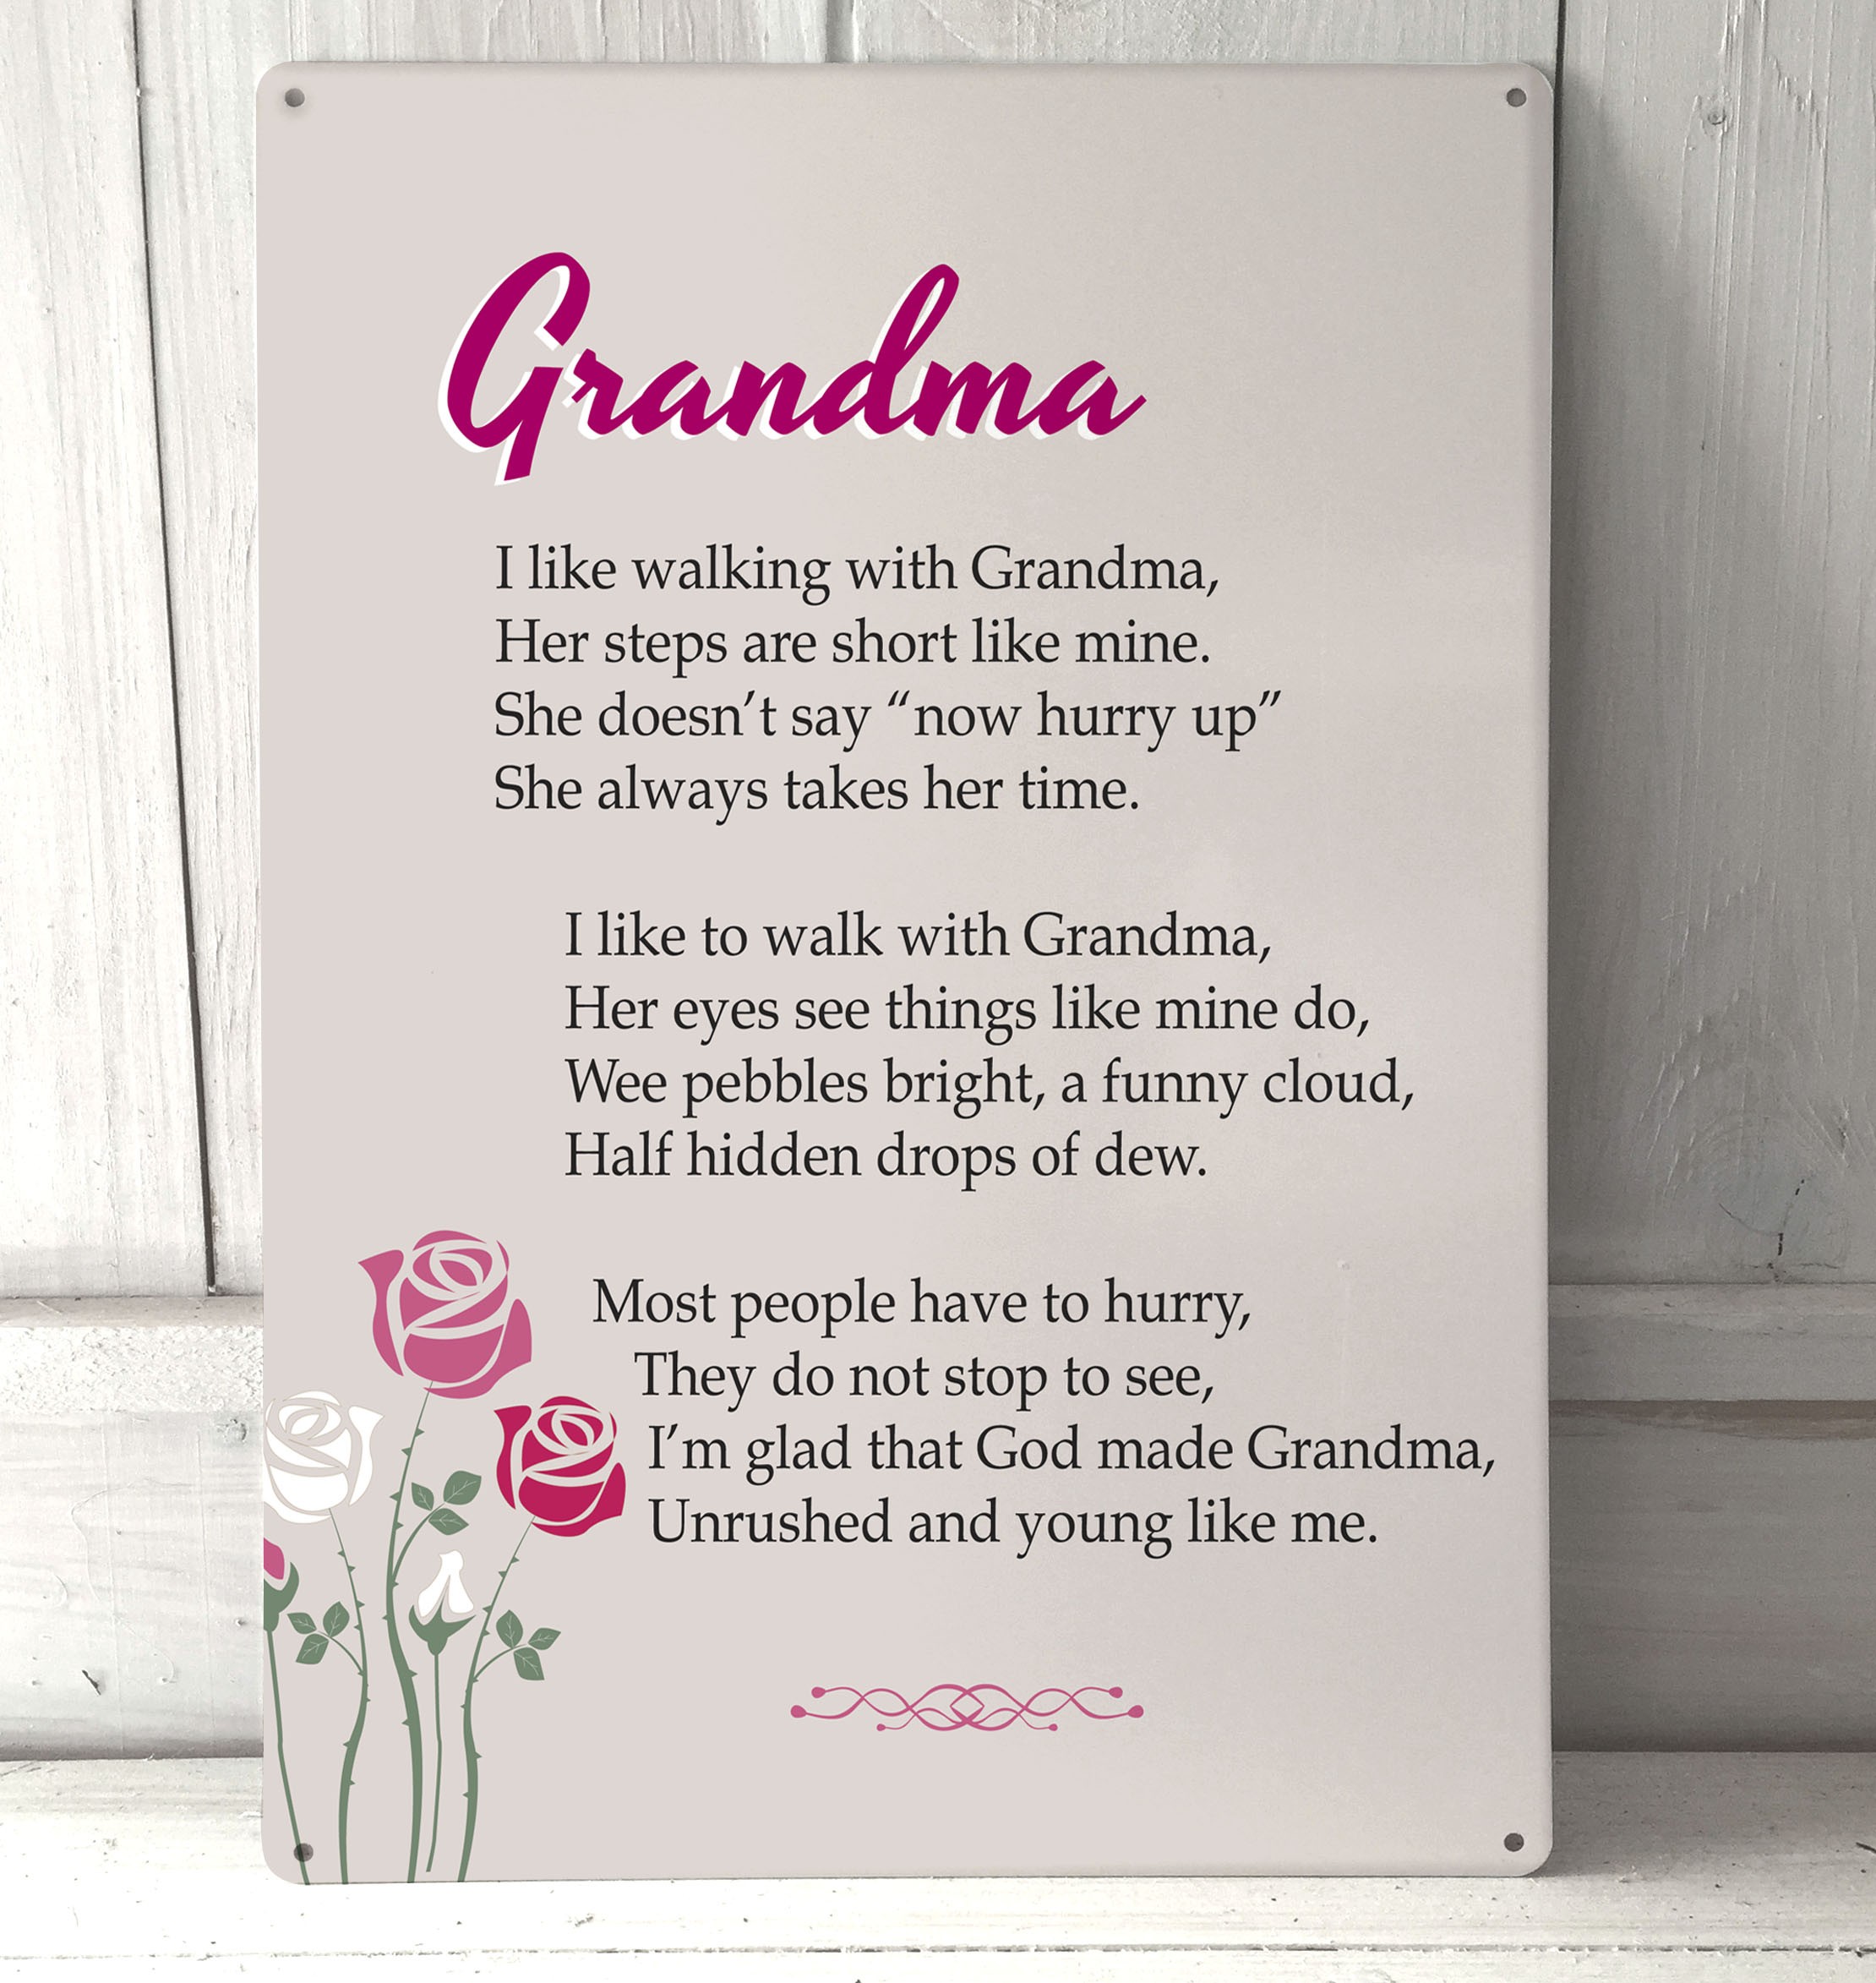 There Goes My Hero: My Grandmother’s Eulogy